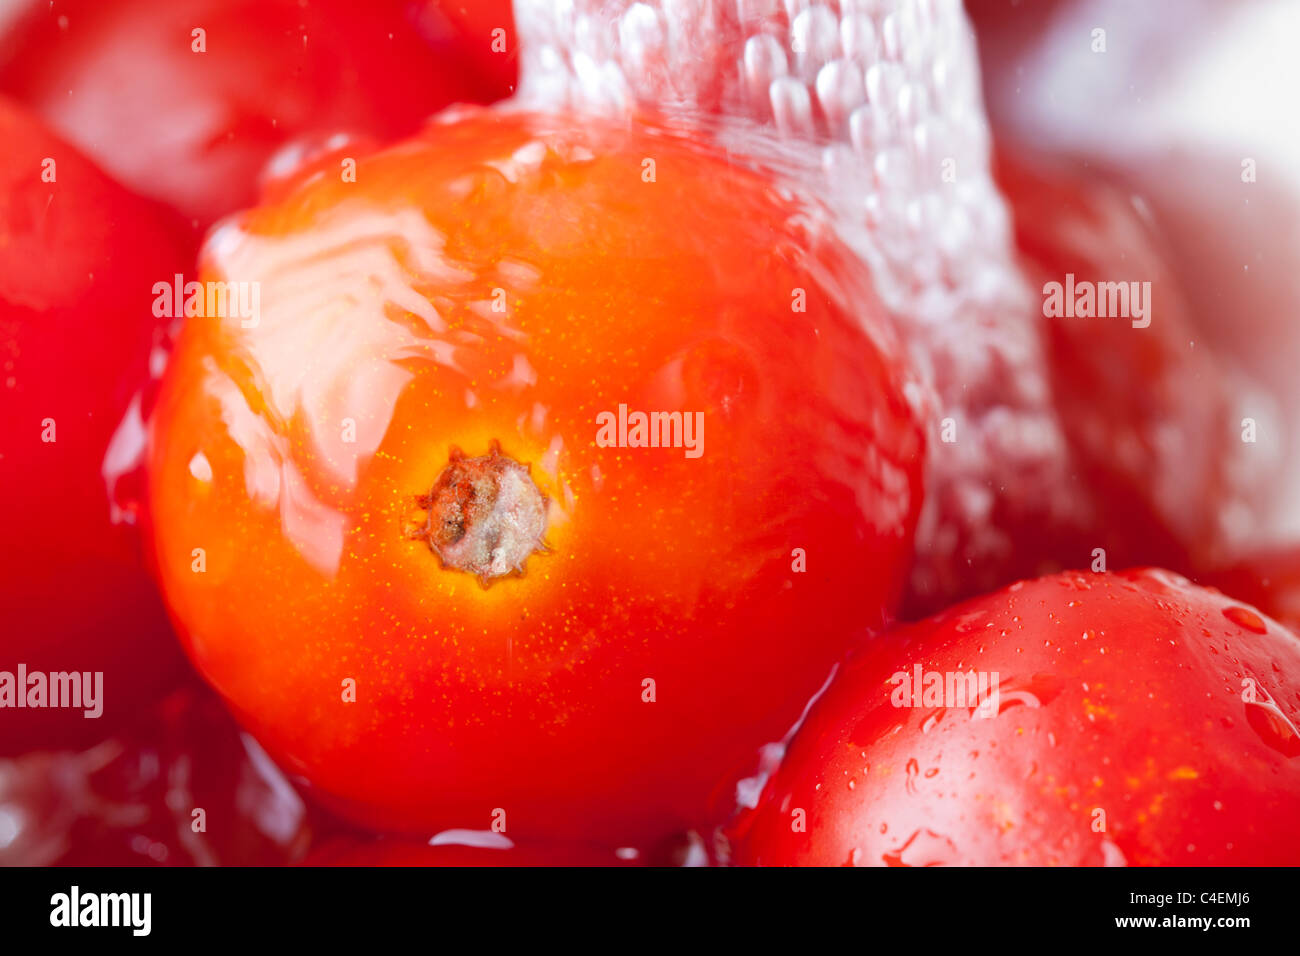 Red ripe tomatoes being washed with water Stock Photo